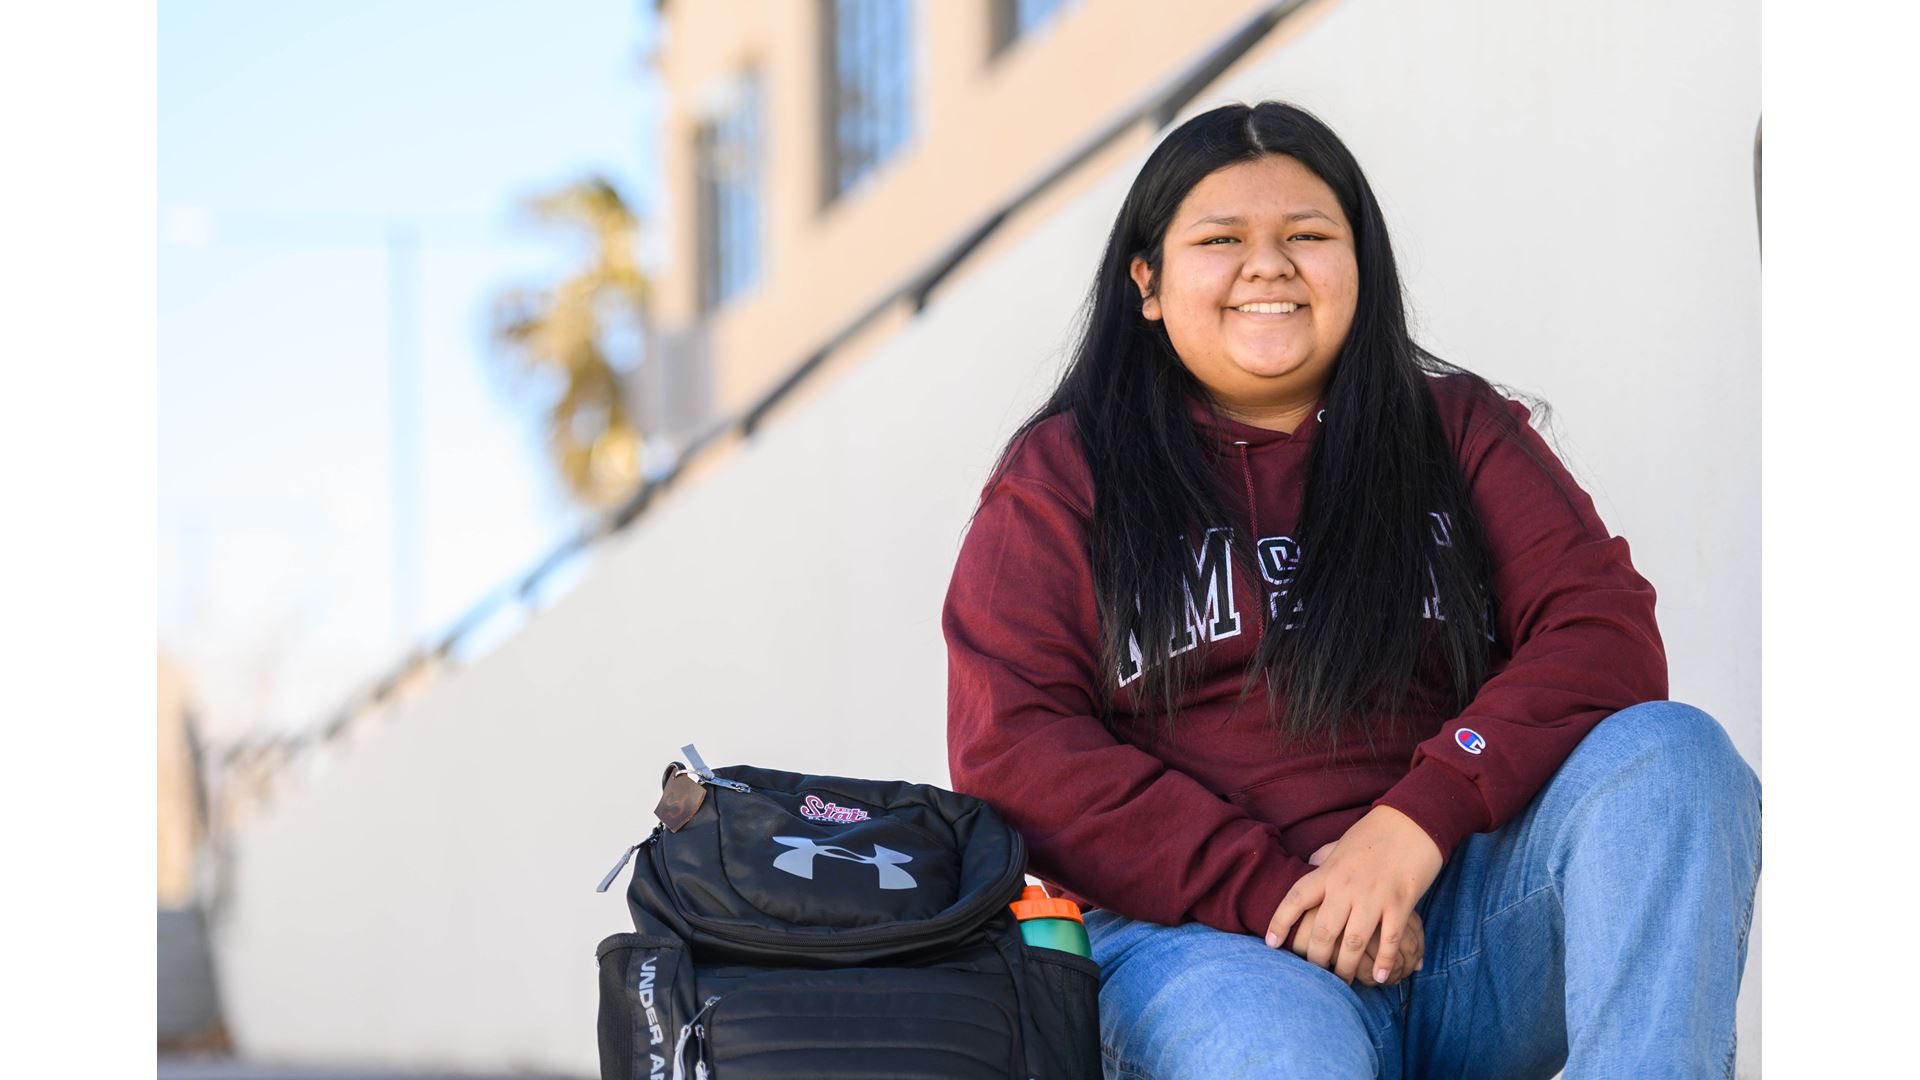 Home away from home: Native students find a community in NMSU’s College of ACES